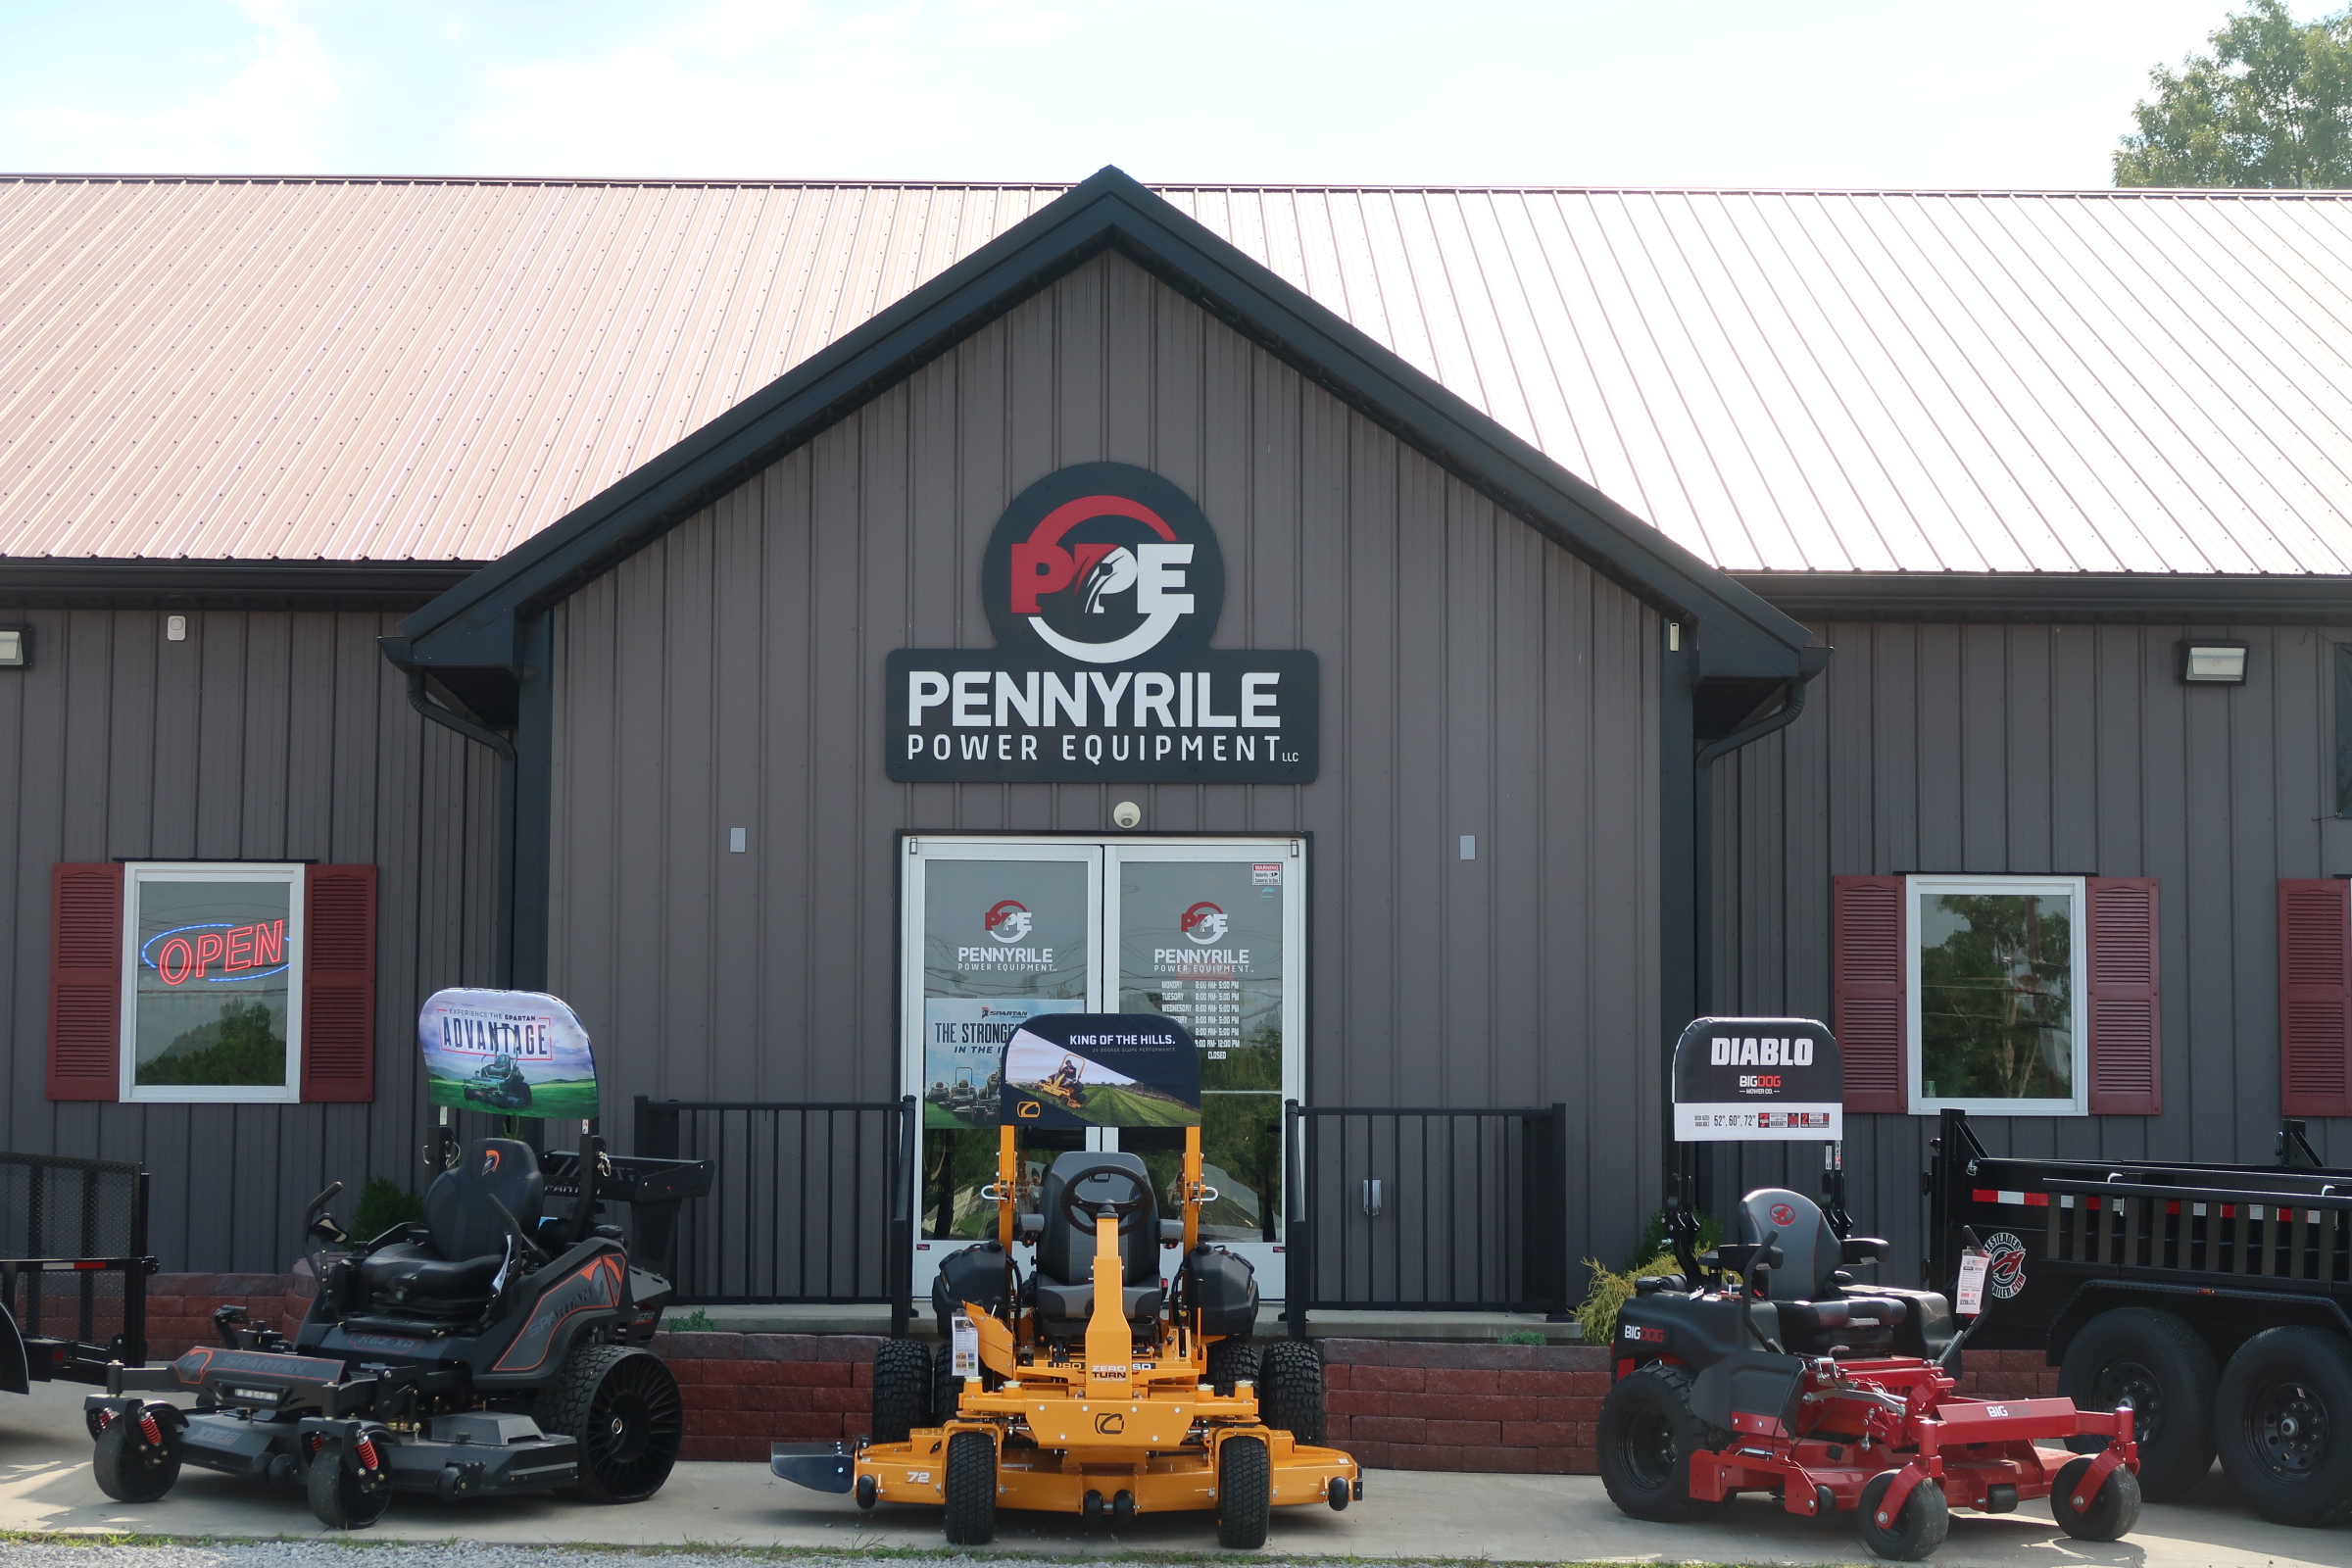 Welcome to Pennyrile Power Equipment